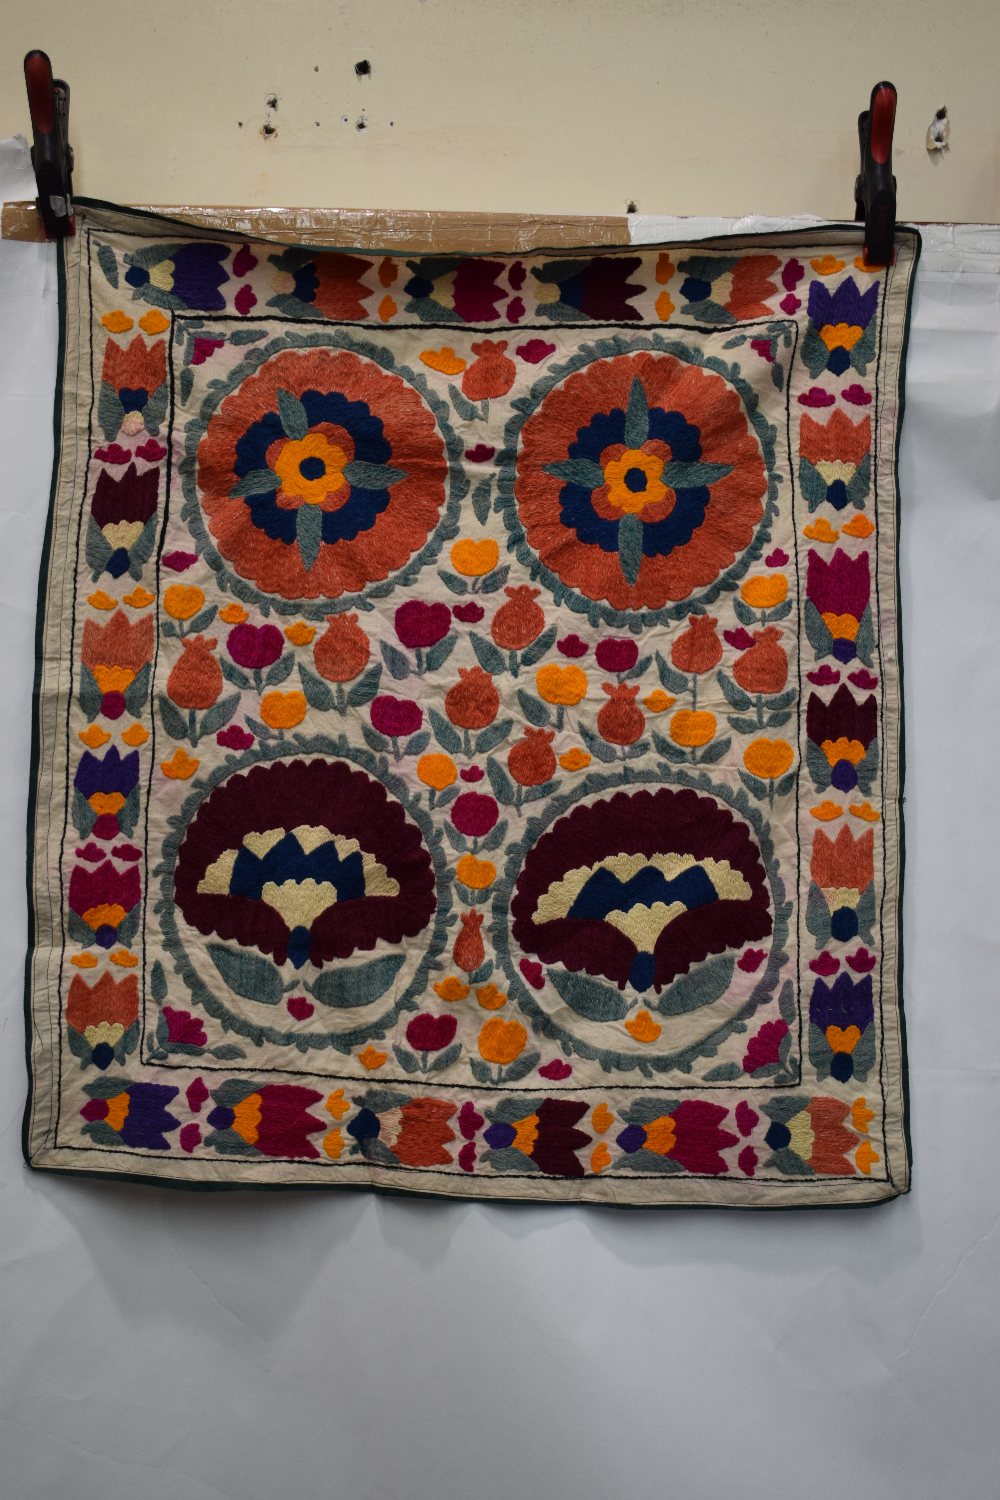 Group of seven small suzanis by the Uzbeks of Afghanistan, mid-20th century, with some wear, time - Image 4 of 19